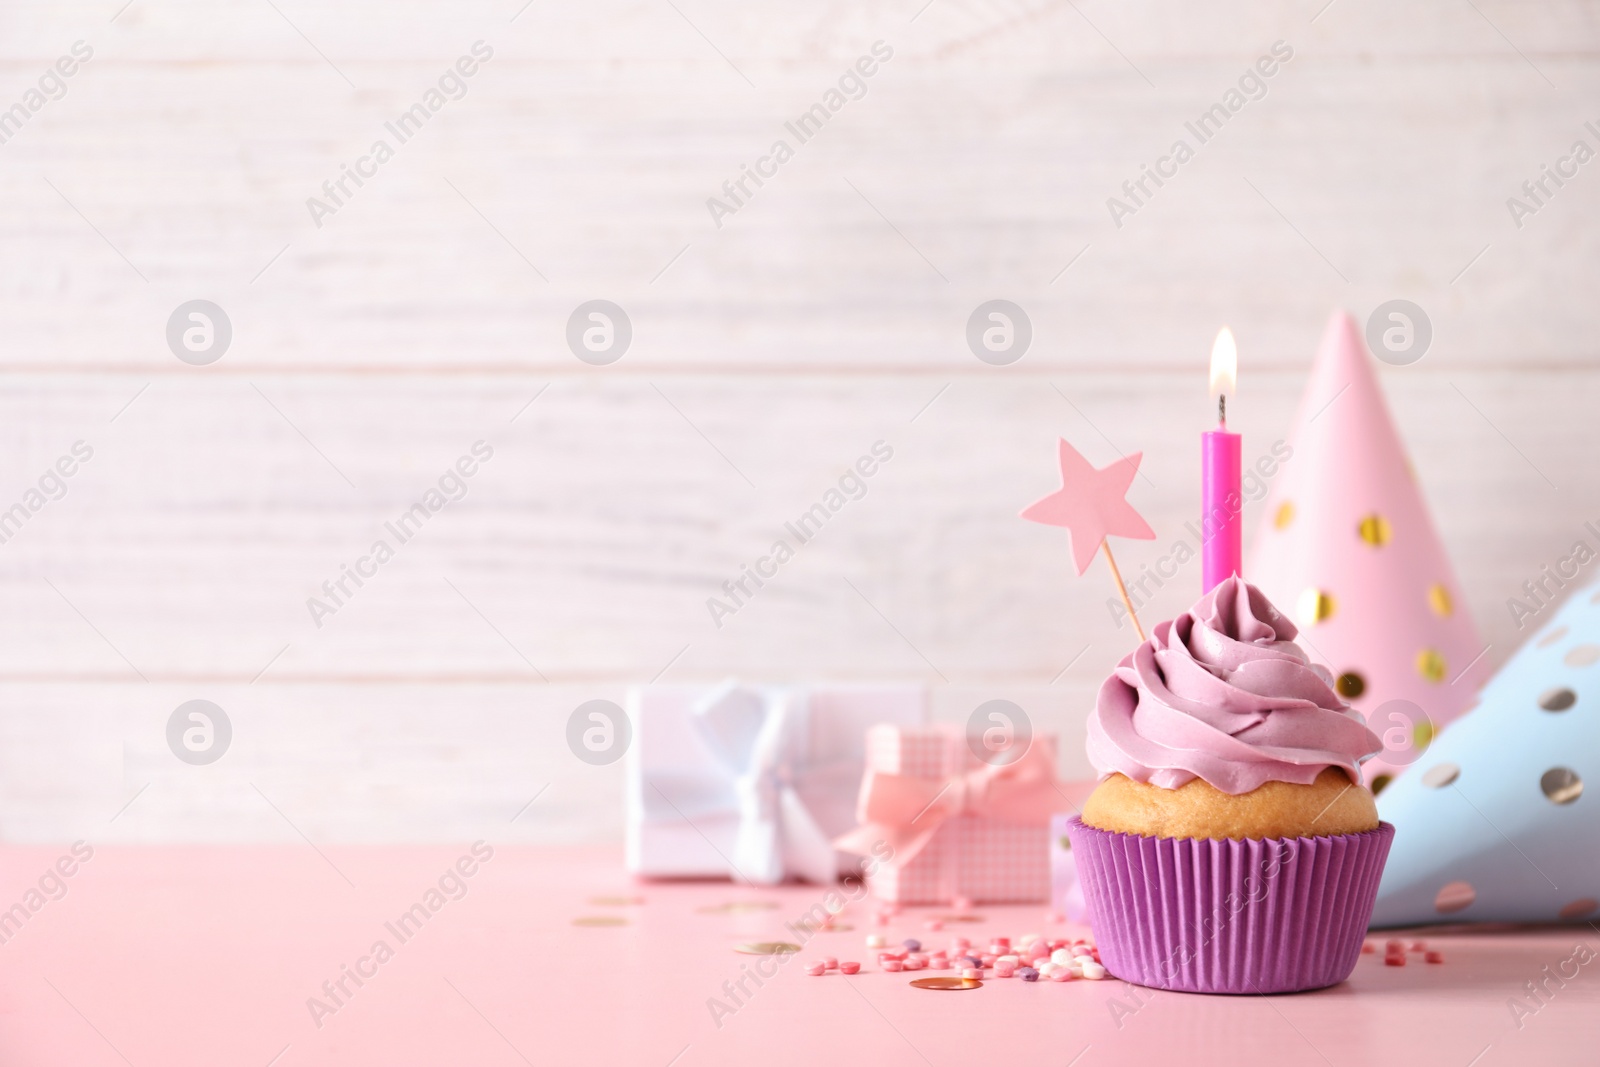 Photo of Birthday cupcake with burning candle, party hats and gift boxes on pink table. Space for text